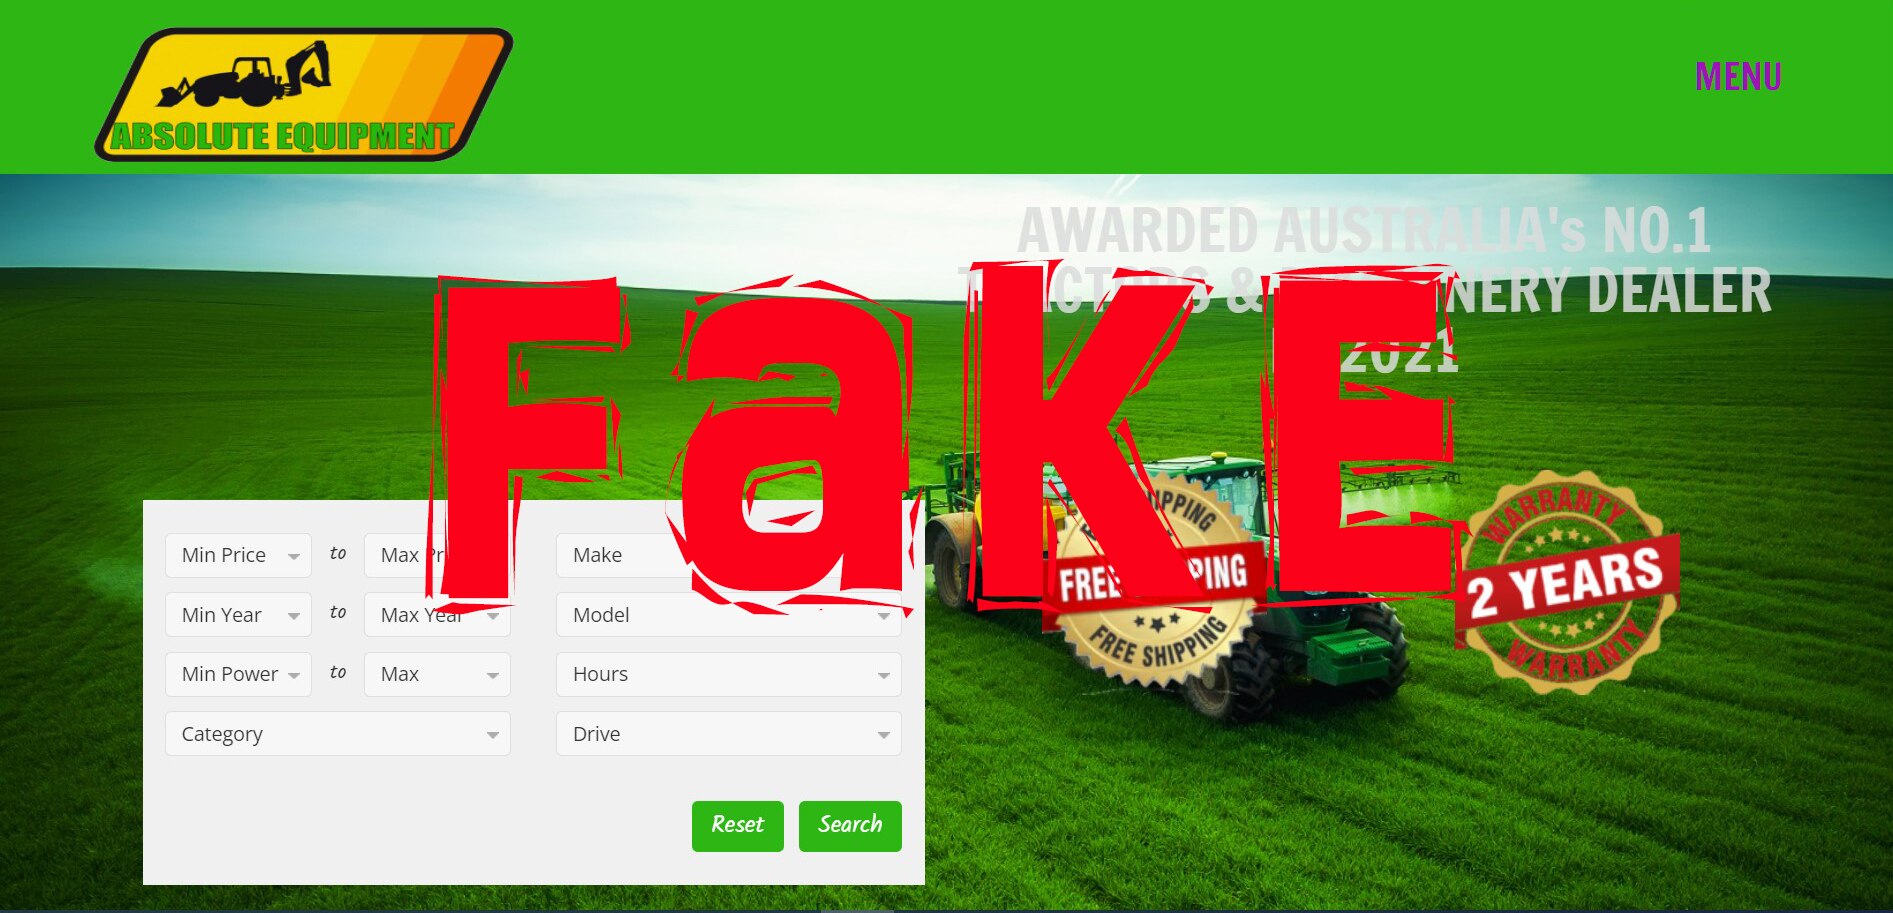 A screenshot from a fake tractor business with the word "fake" written across it in big red letters